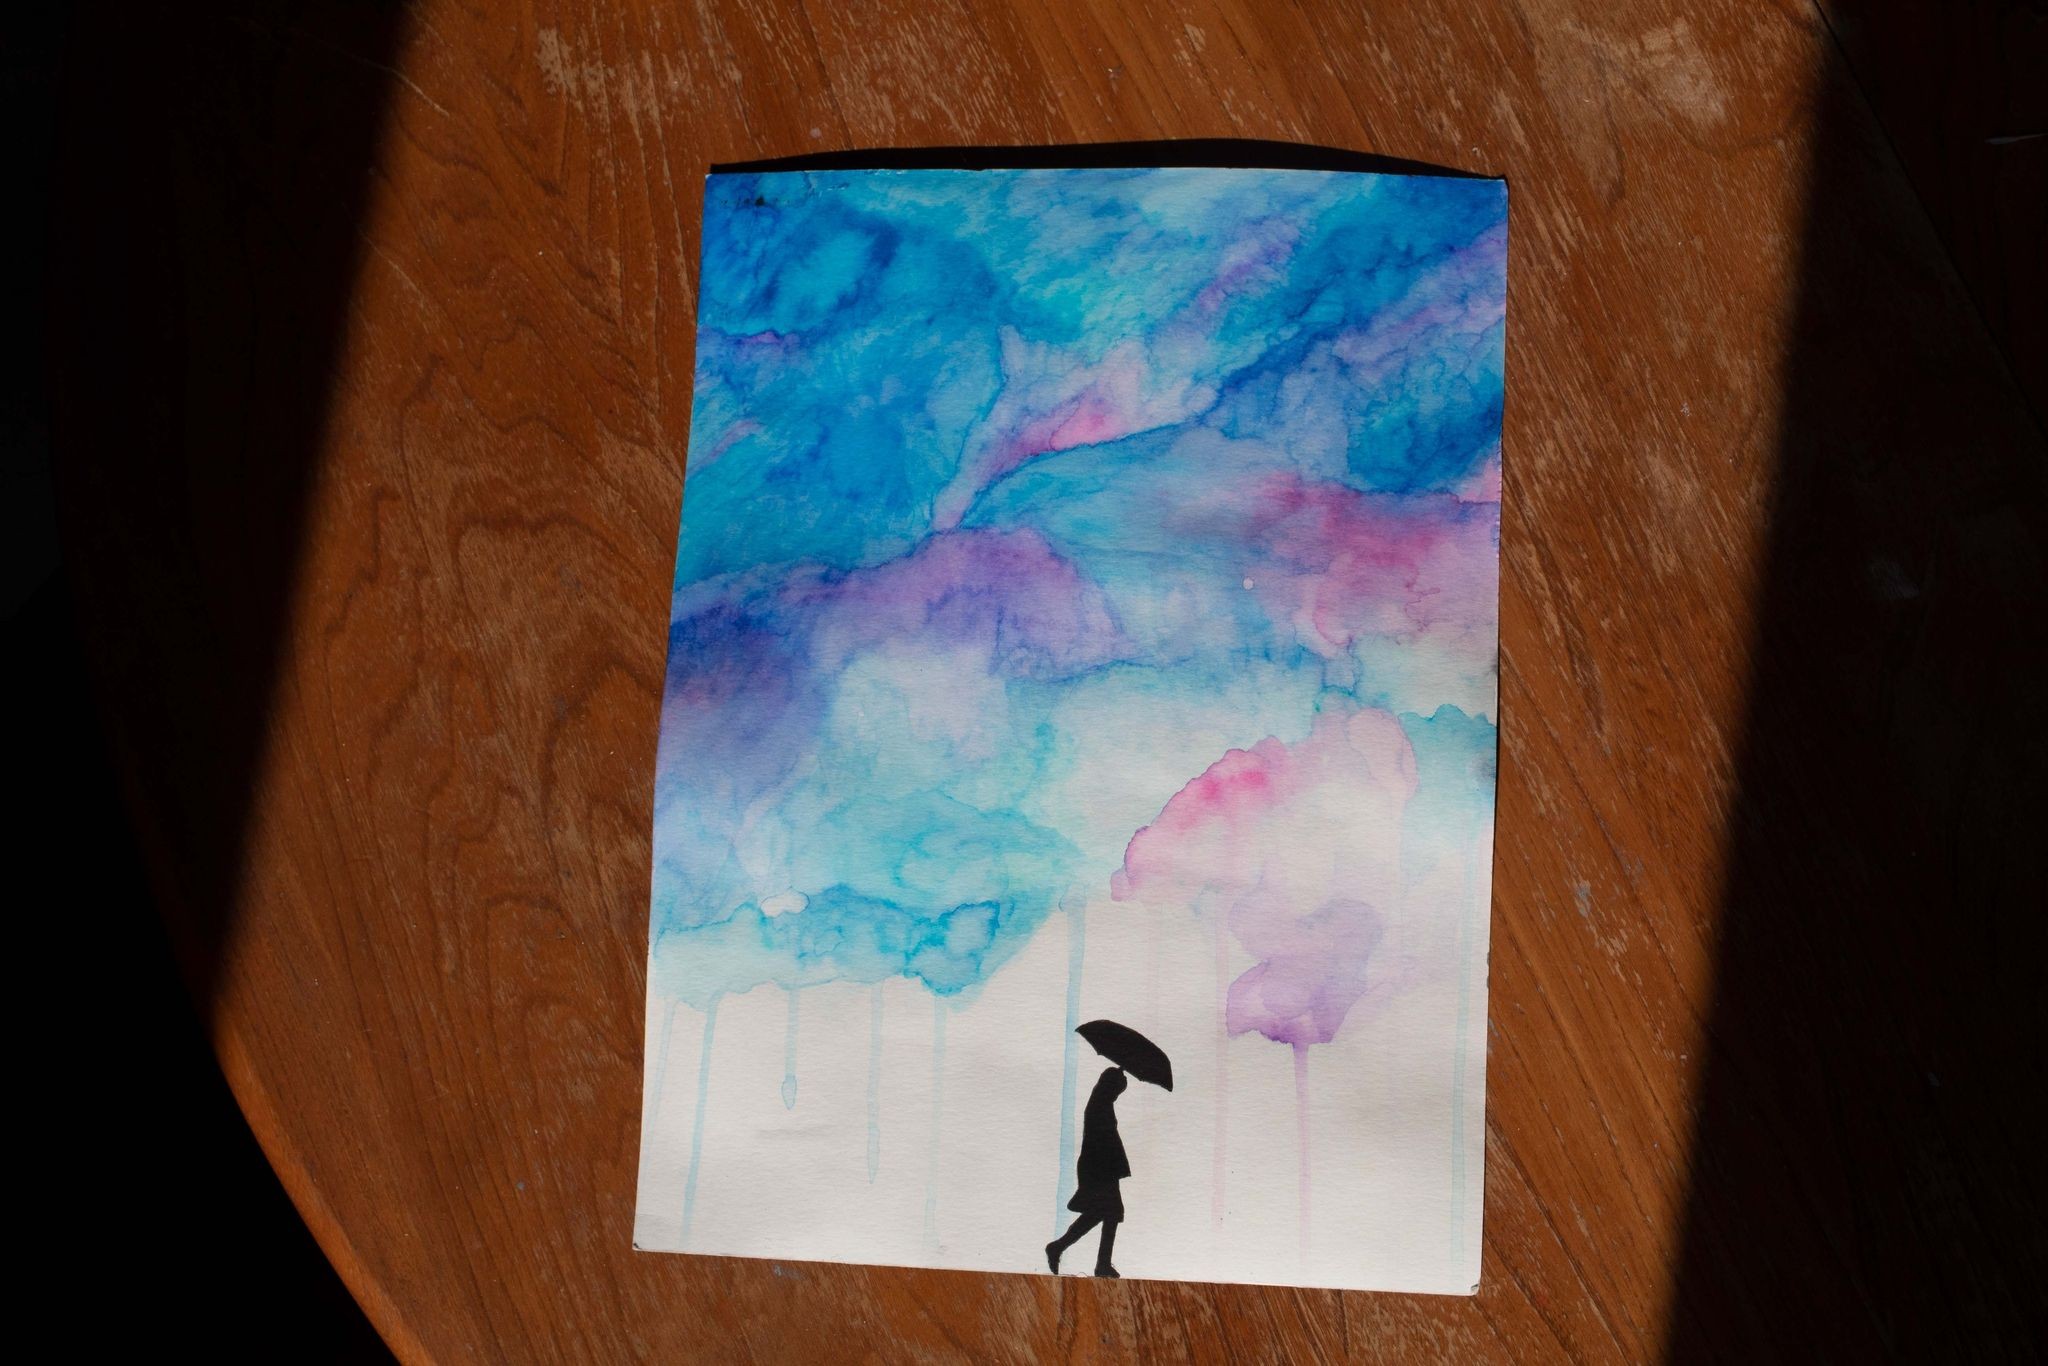 Product image of a watercolour painting of blue and pink clouds raining onto the silhouette of a person holding an umbrella, viewed from farther away